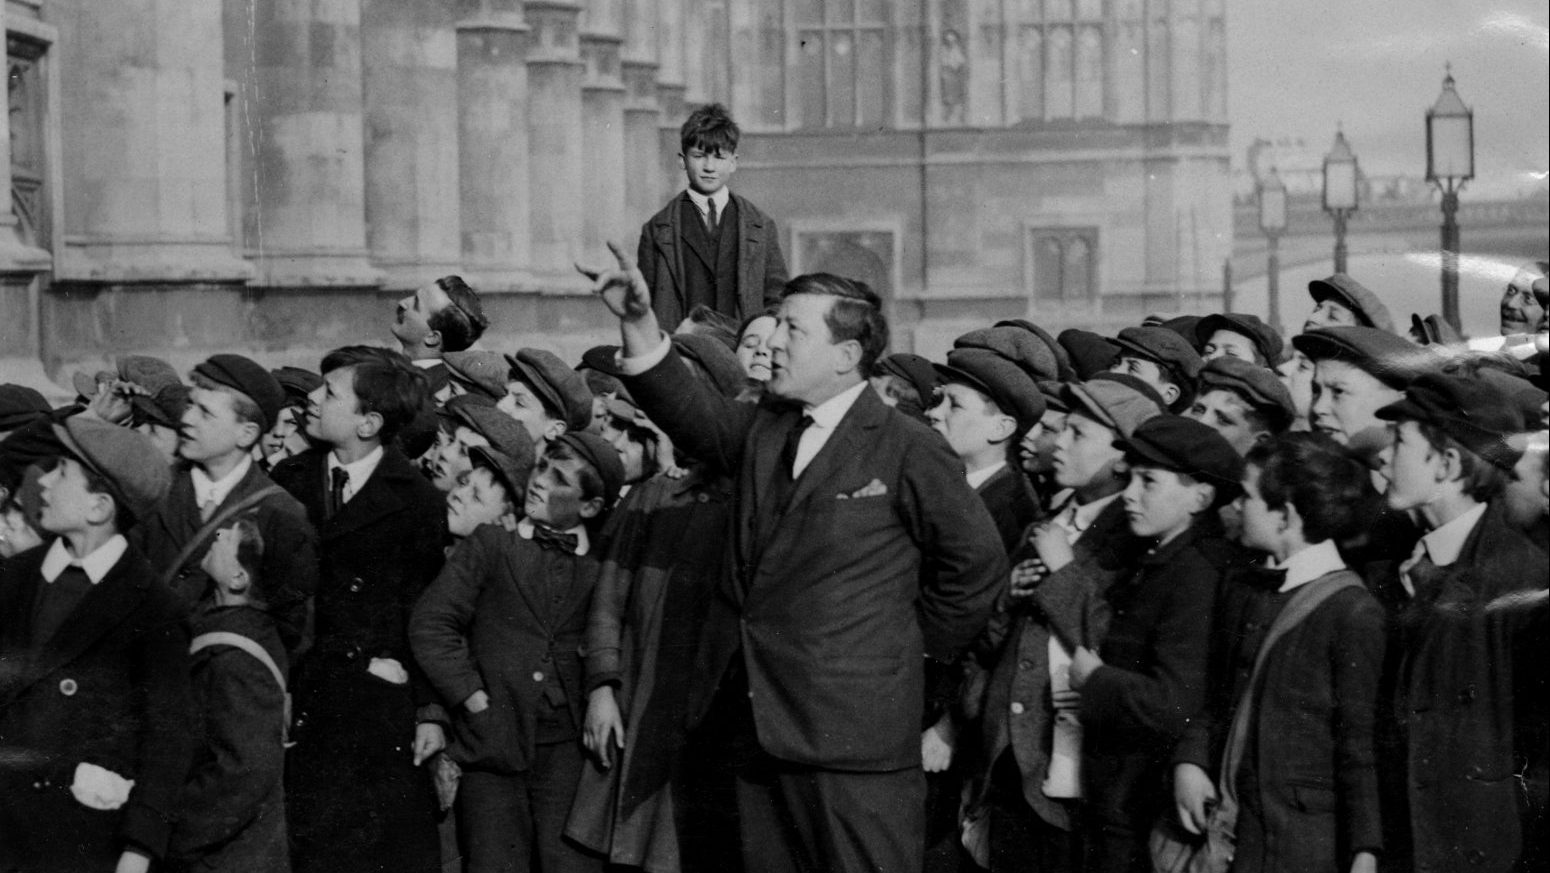 Welsh politician Clement Edwards leads a group of schoolchildren on a tour of the Houses of Parliament, c1925
Photo: Kadel & Herbert. Photo: Visual Studies Workshop/Getty